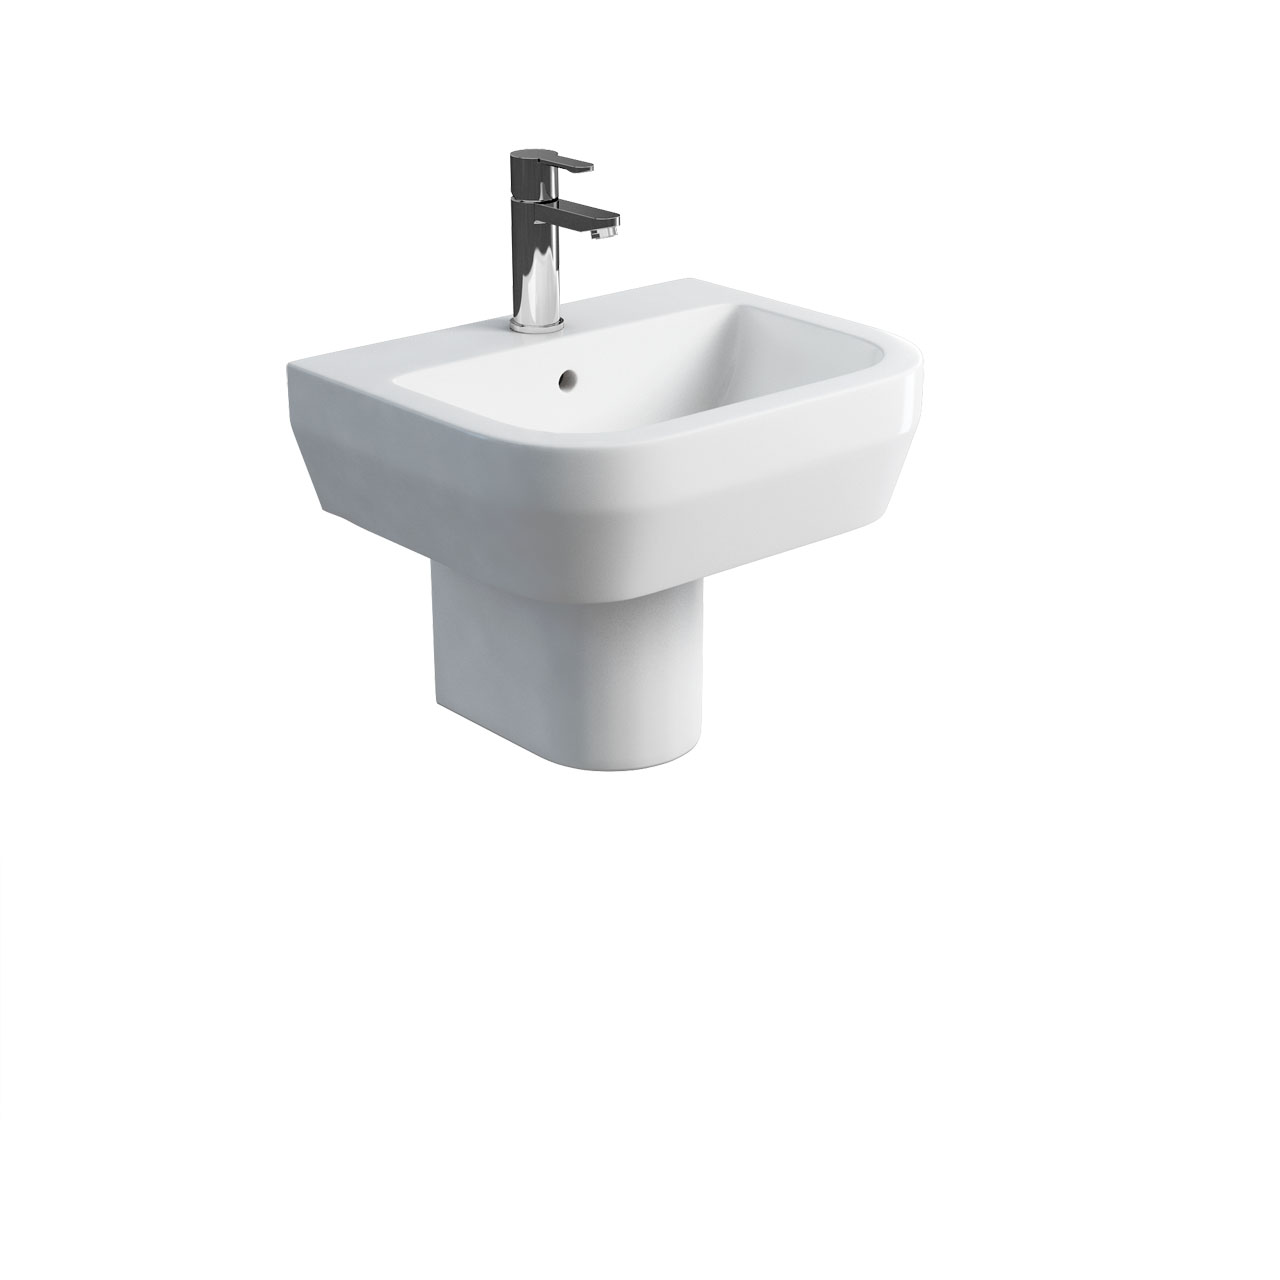 Curve S30 500 basin and round fronted semi pedestal